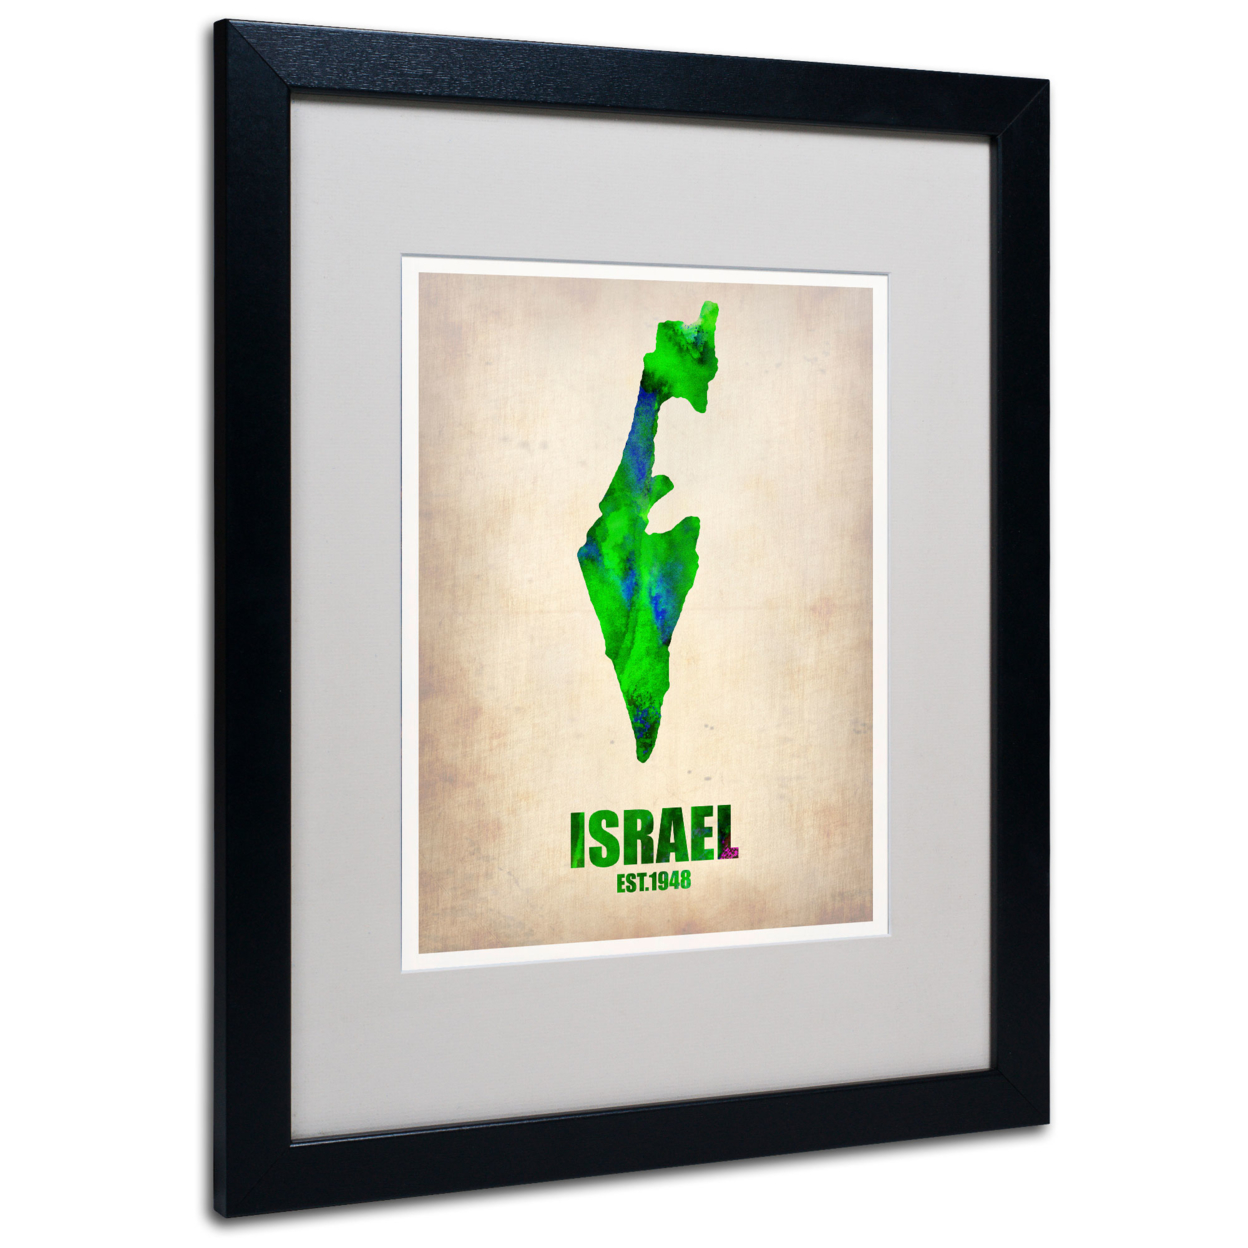 Naxart 'Israel Watercolor Map' Black Wooden Framed Art 18 X 22 Inches